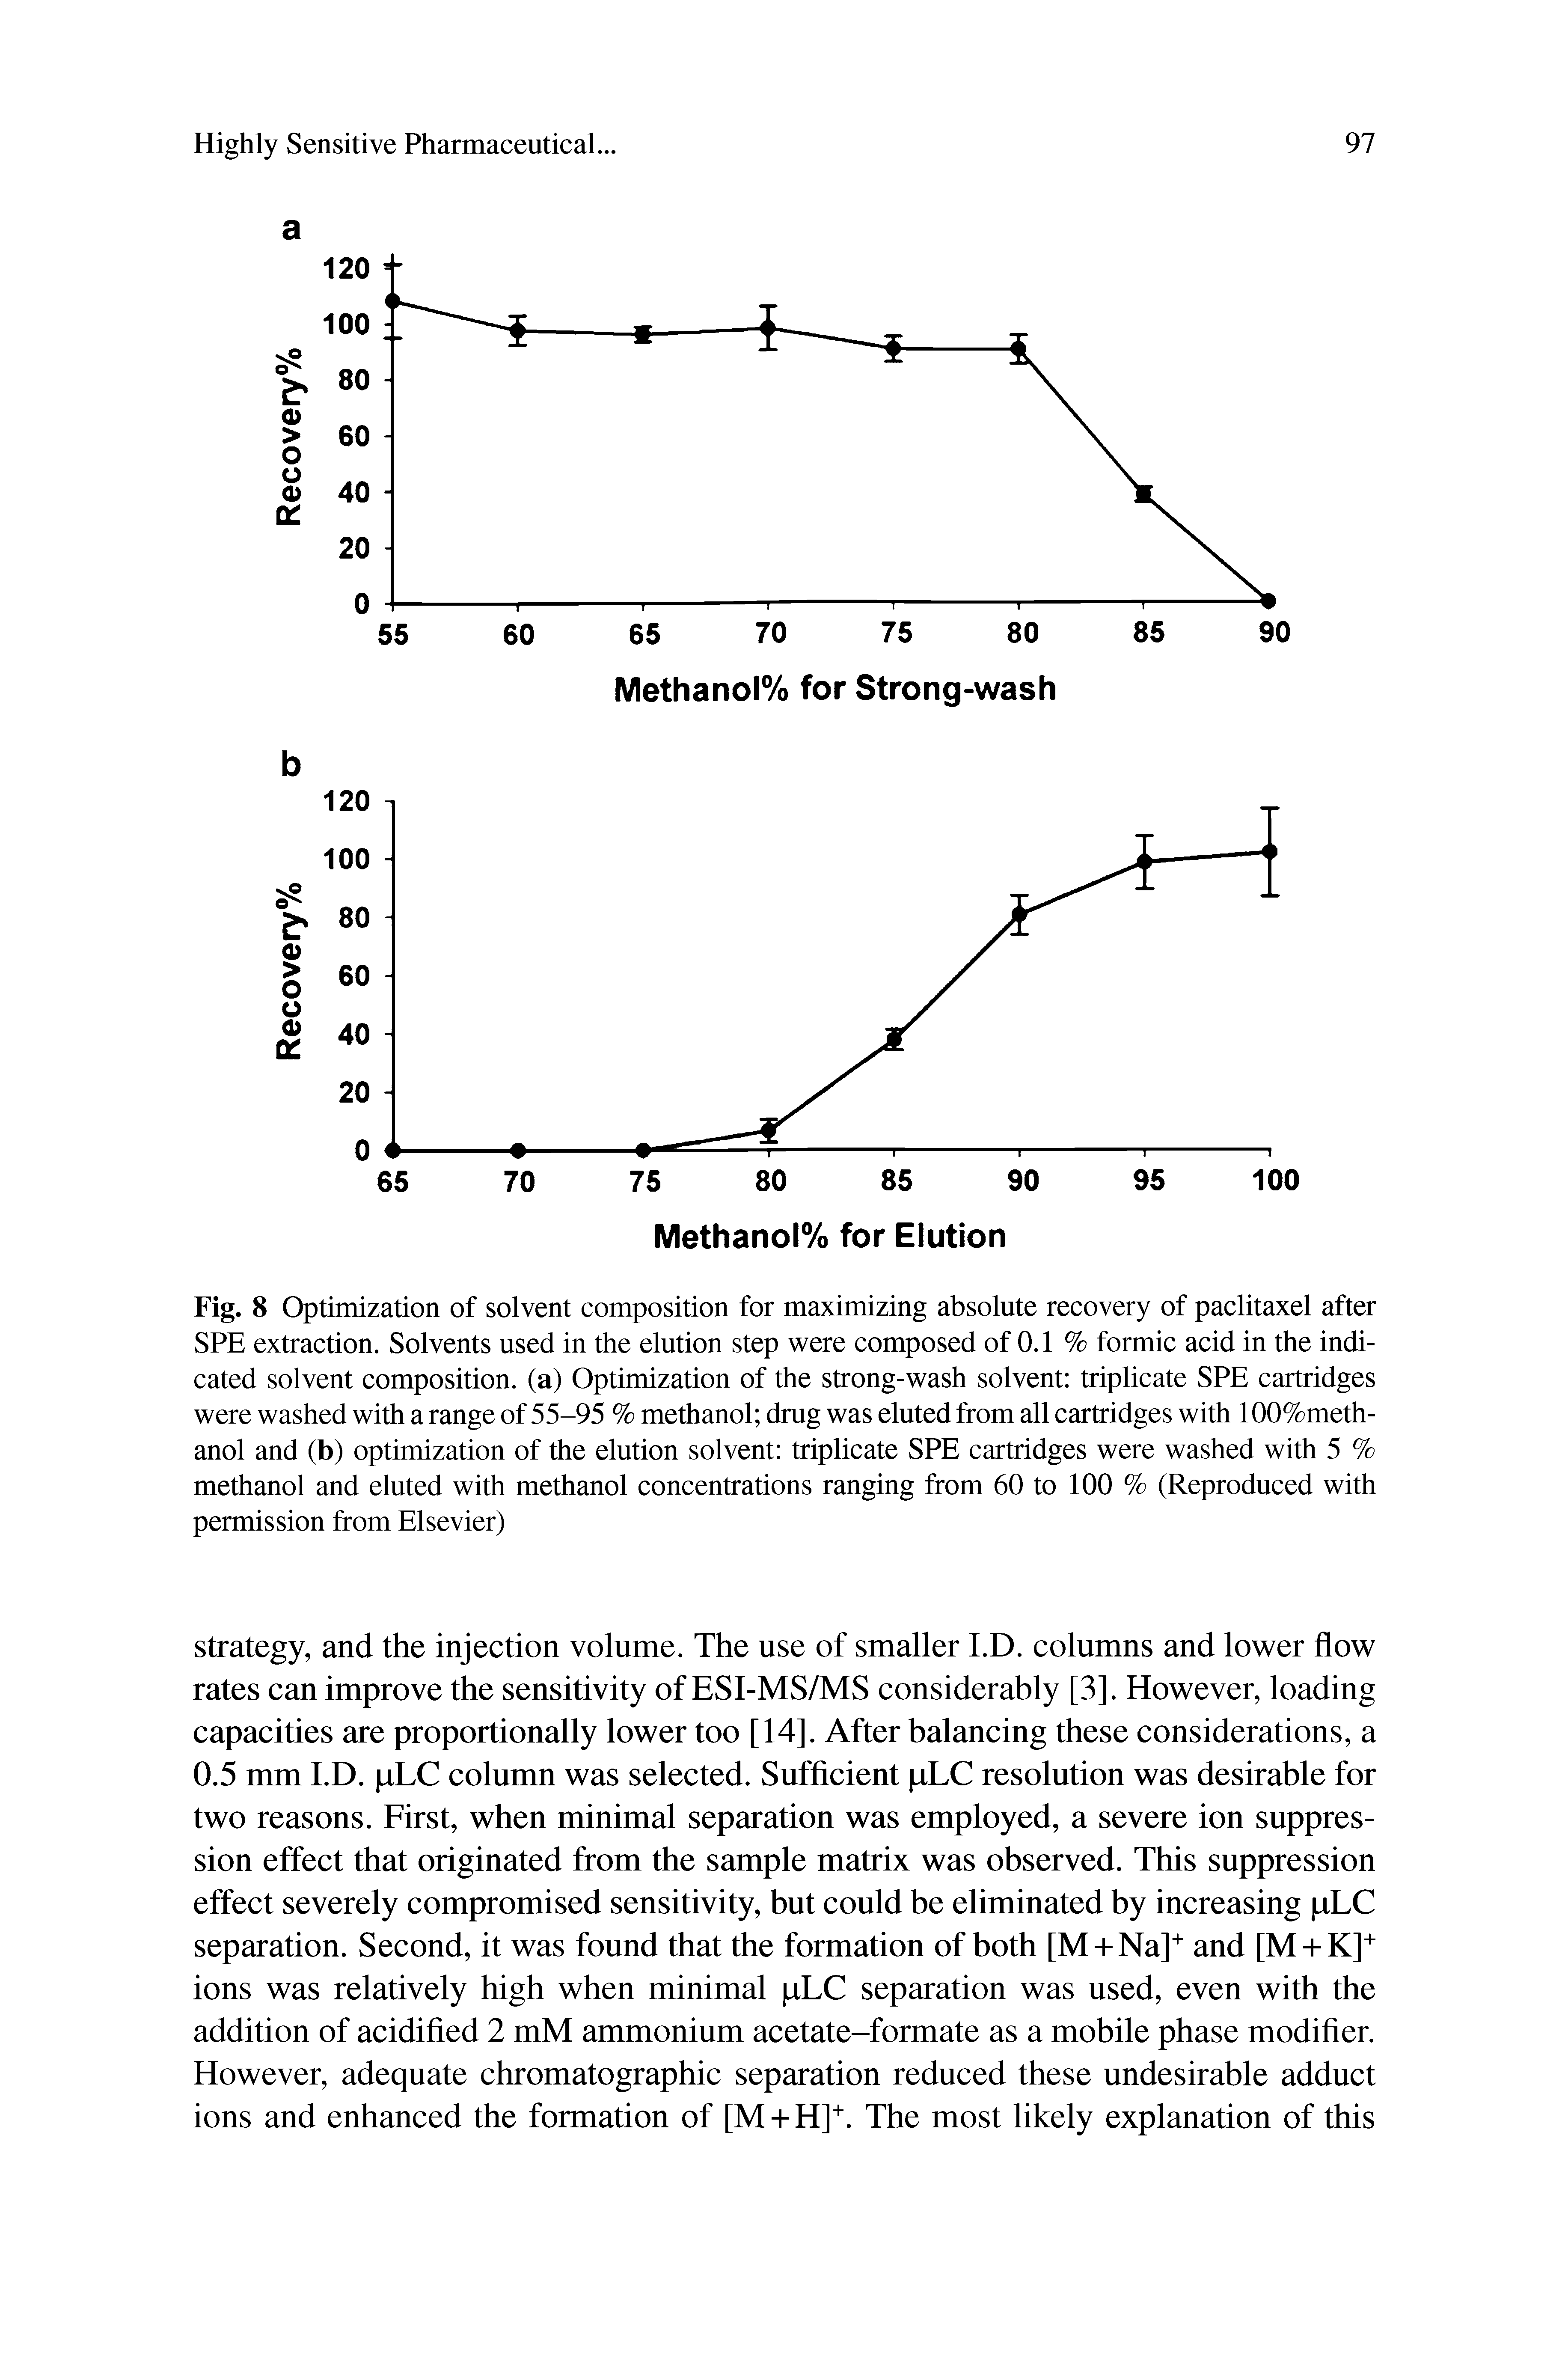 Fig. 8 Optimization of solvent composition for maximizing absolute recovery of paclitaxel after SPE extraction. Solvents used in the elution step were composed of 0.1 % formic acid in the indicated solvent composition, (a) Optimization of the strong-wash solvent triplicate SPE cartridges were washed with a range of 55-95 % methanol drug was eluted from all cartridges with 100%meth-anol and (b) optimization of the elution solvent triplicate SPE cartridges were washed with 5 % methanol and eluted with methanol concentrations ranging from 60 to 100 % (Reproduced with permission from Elsevier)...